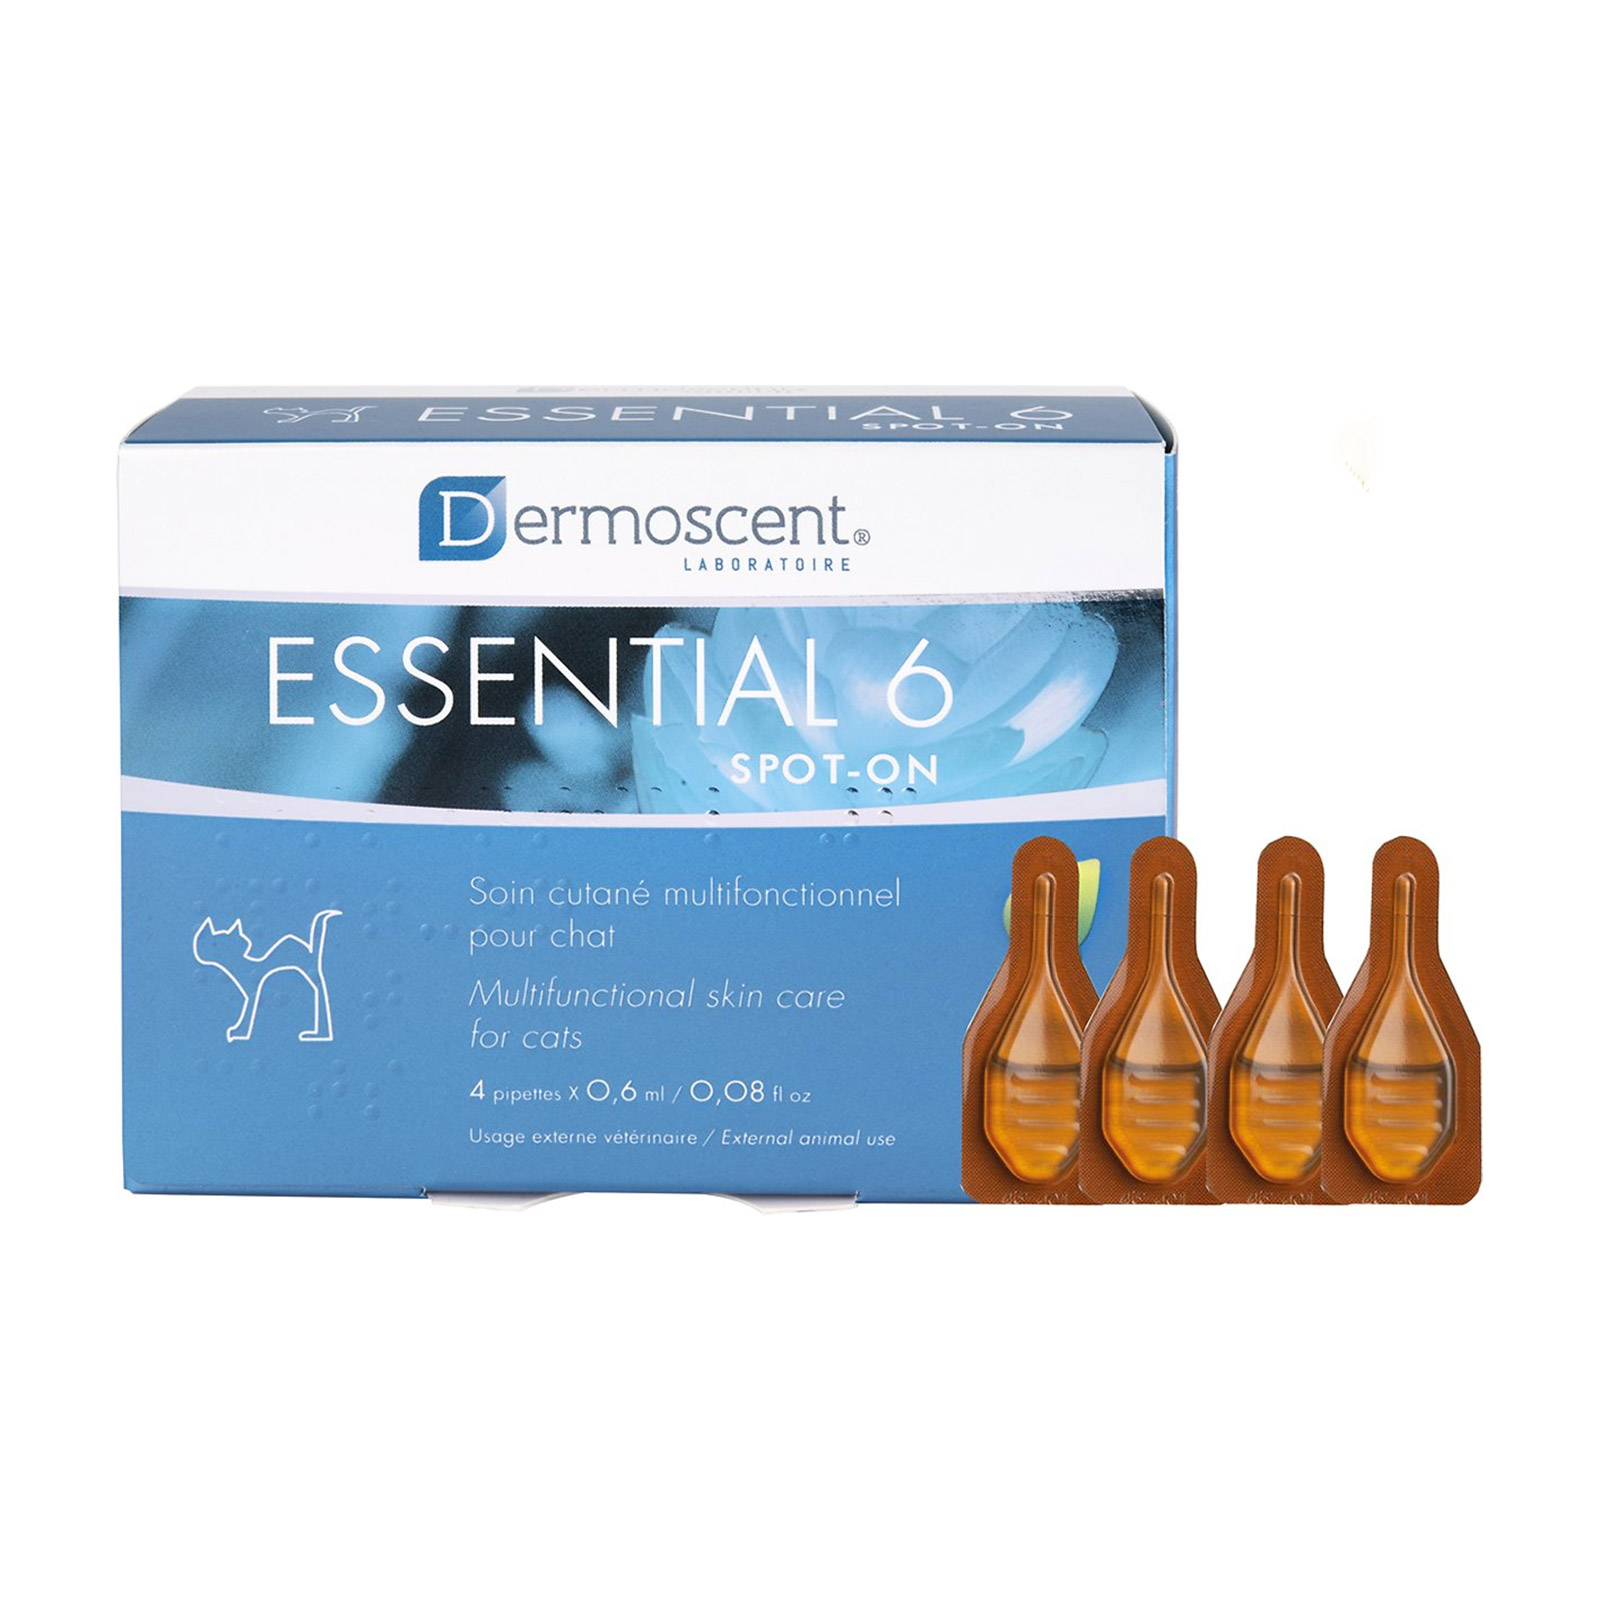 Essential 6 For Cats 4 Months
